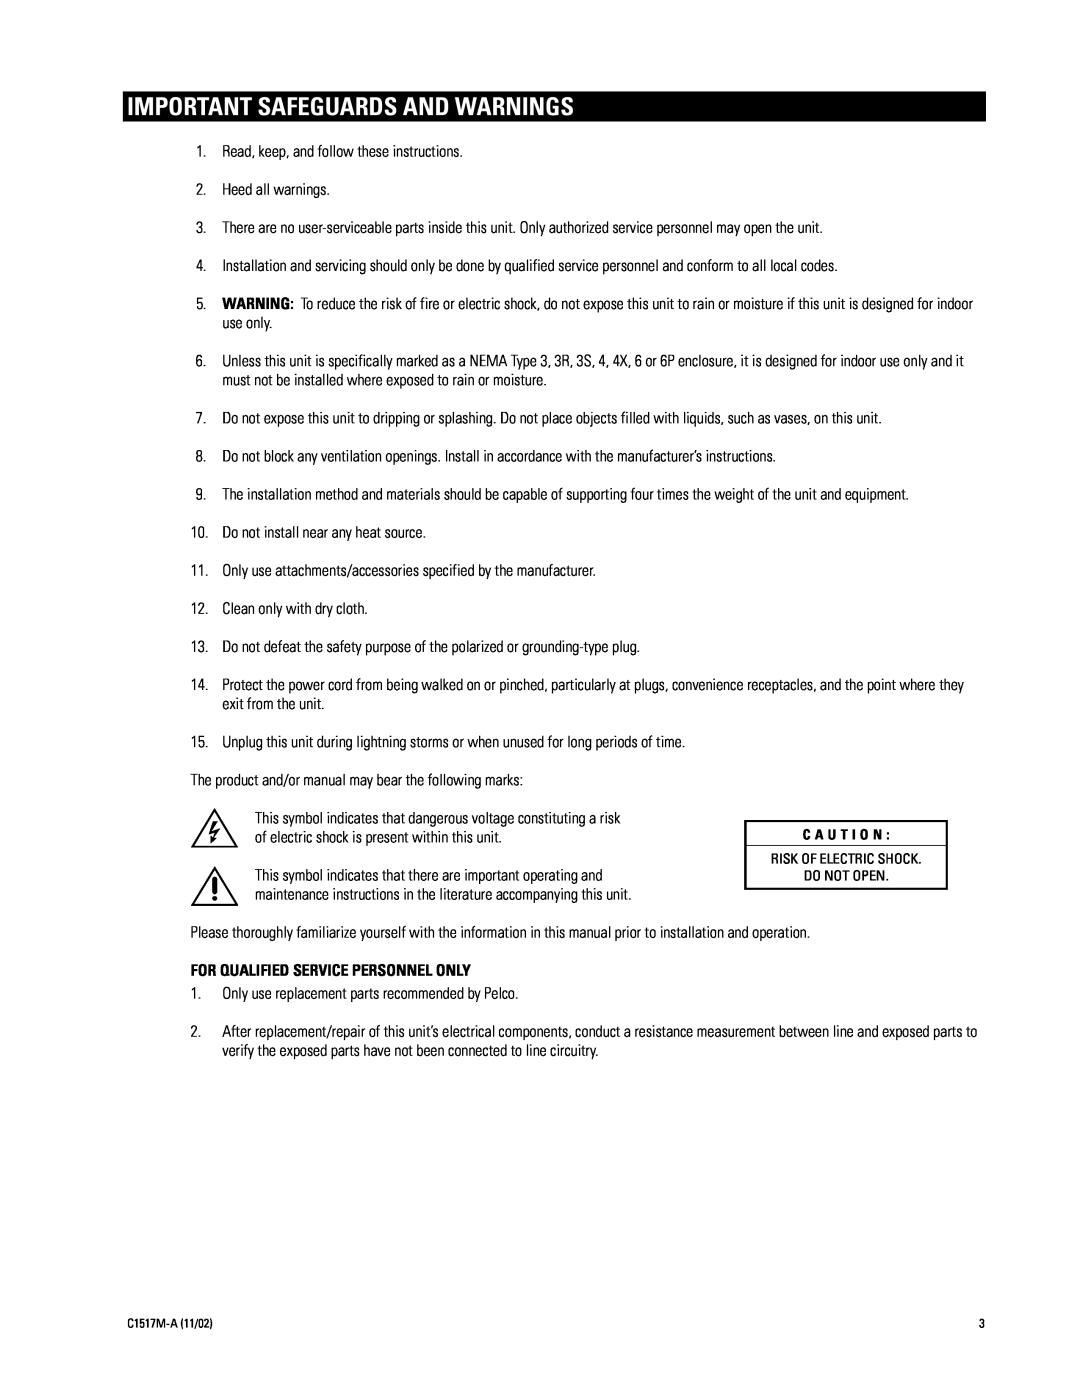 Pelco ALM2064 manual Important Safeguards And Warnings, For Qualified Service Personnel Only 